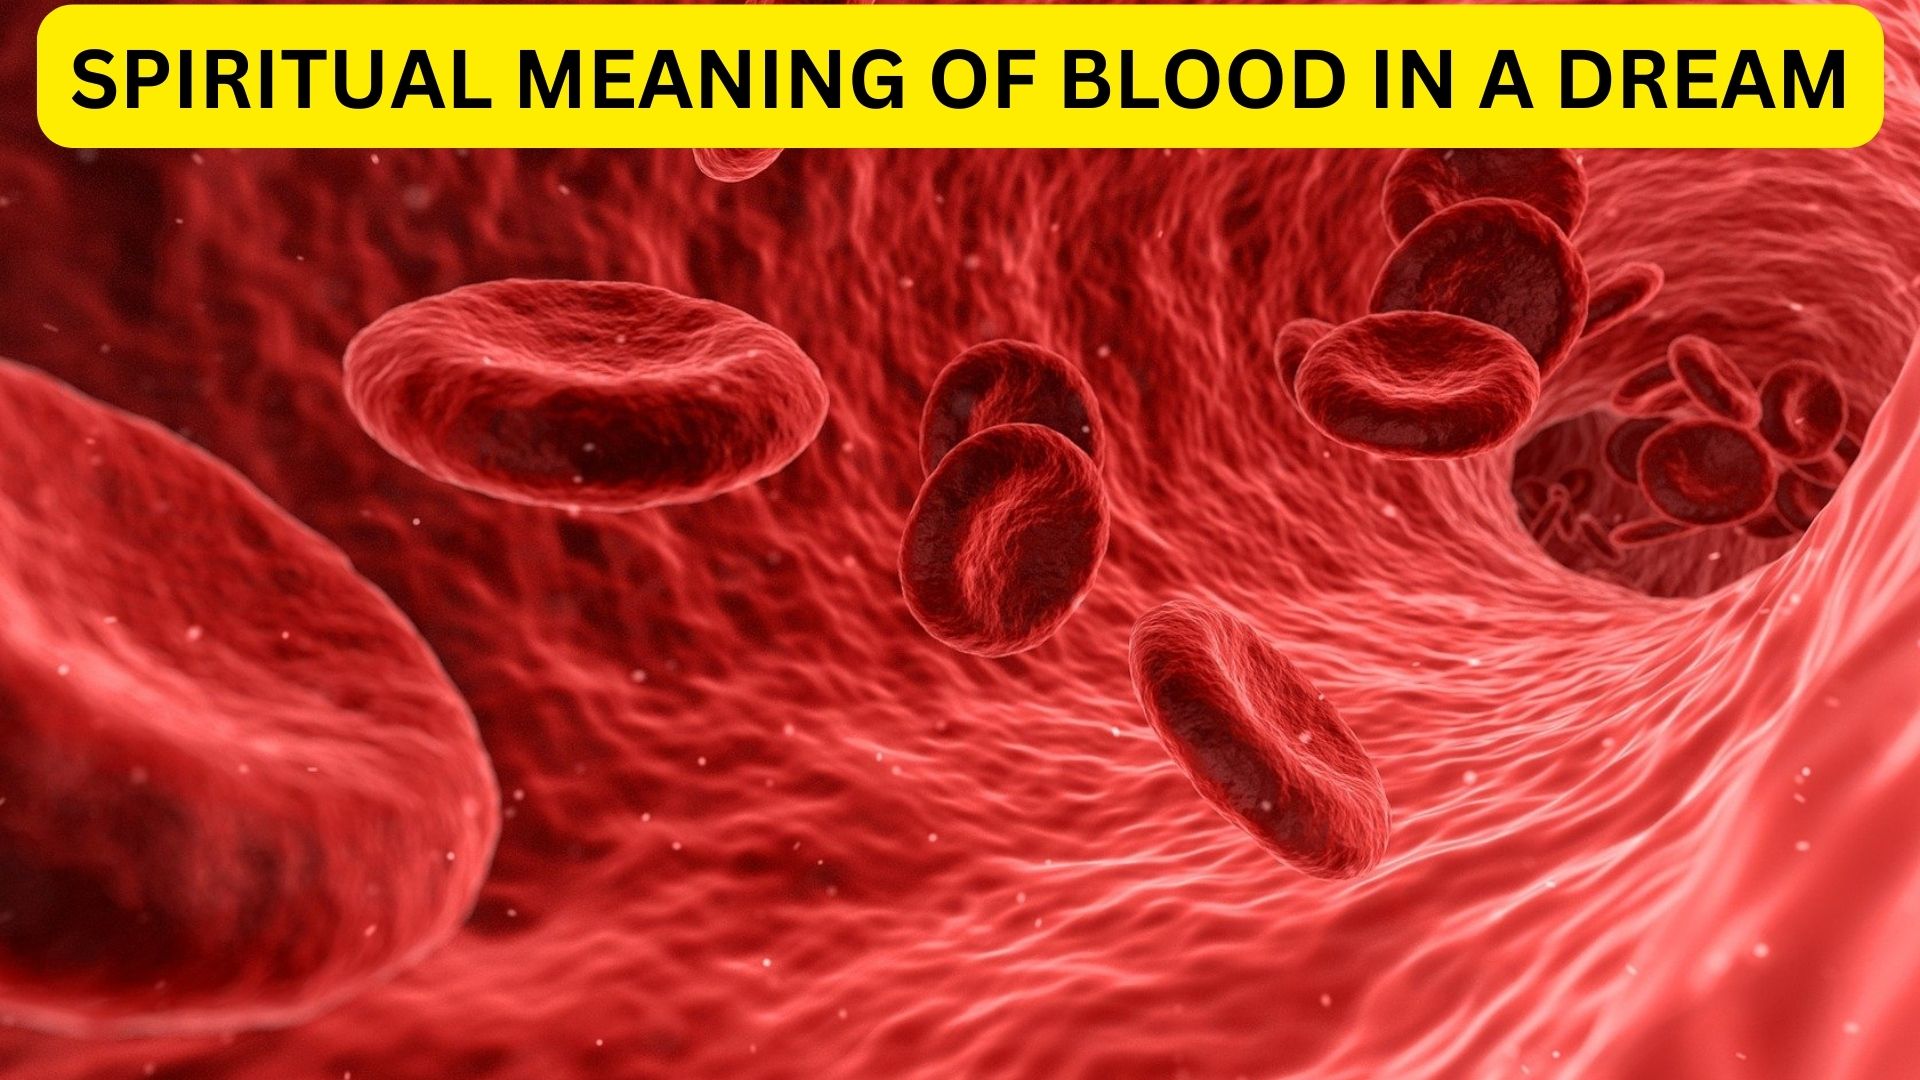 Spiritual Meaning Of Blood In A Dream - Represents Vitality And Life Force